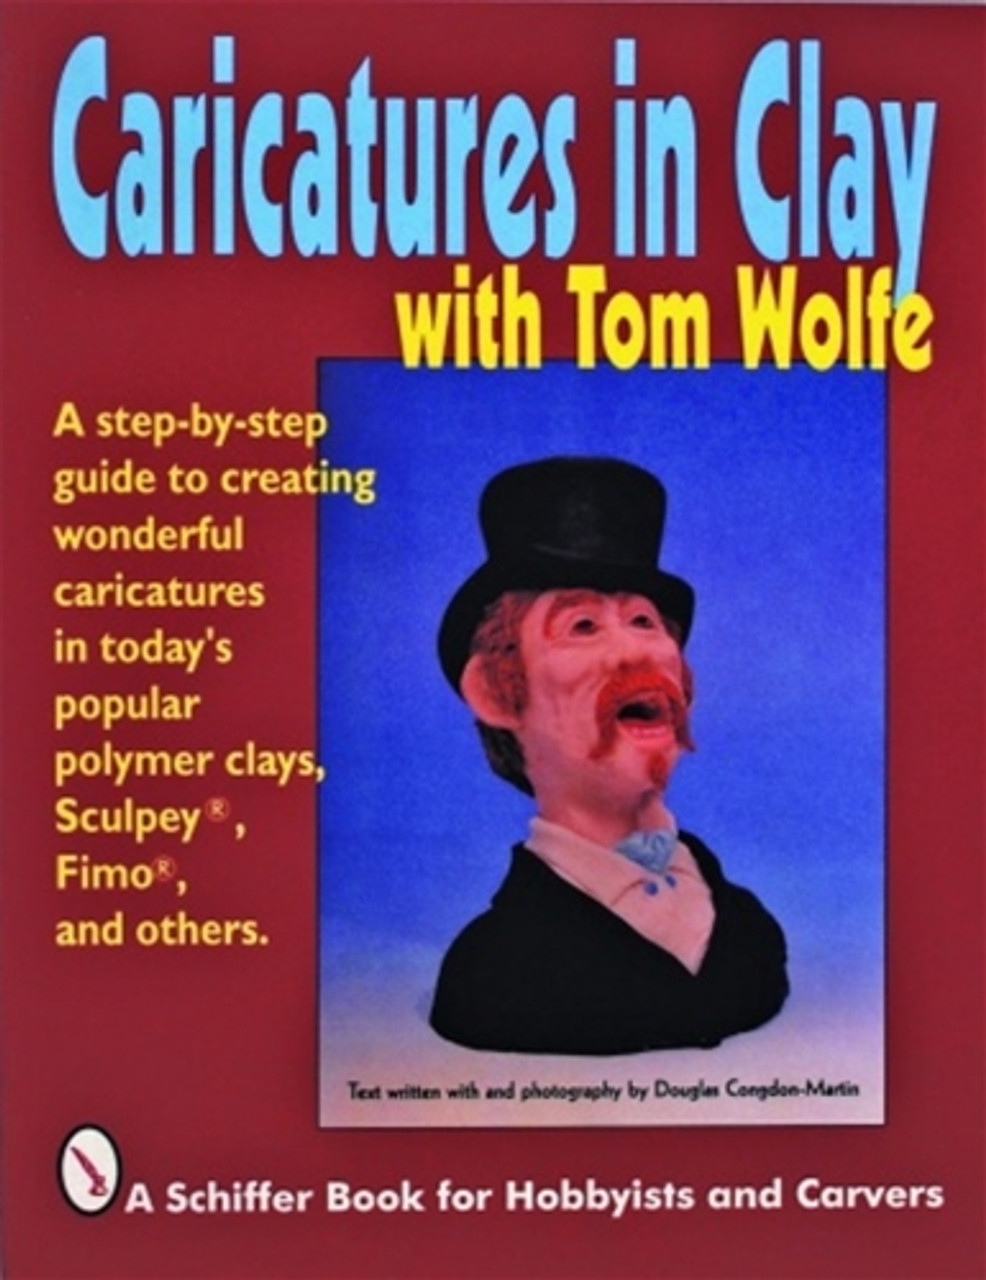 Caricatures In ClayCaricatures in Clay with Tom Wolfe